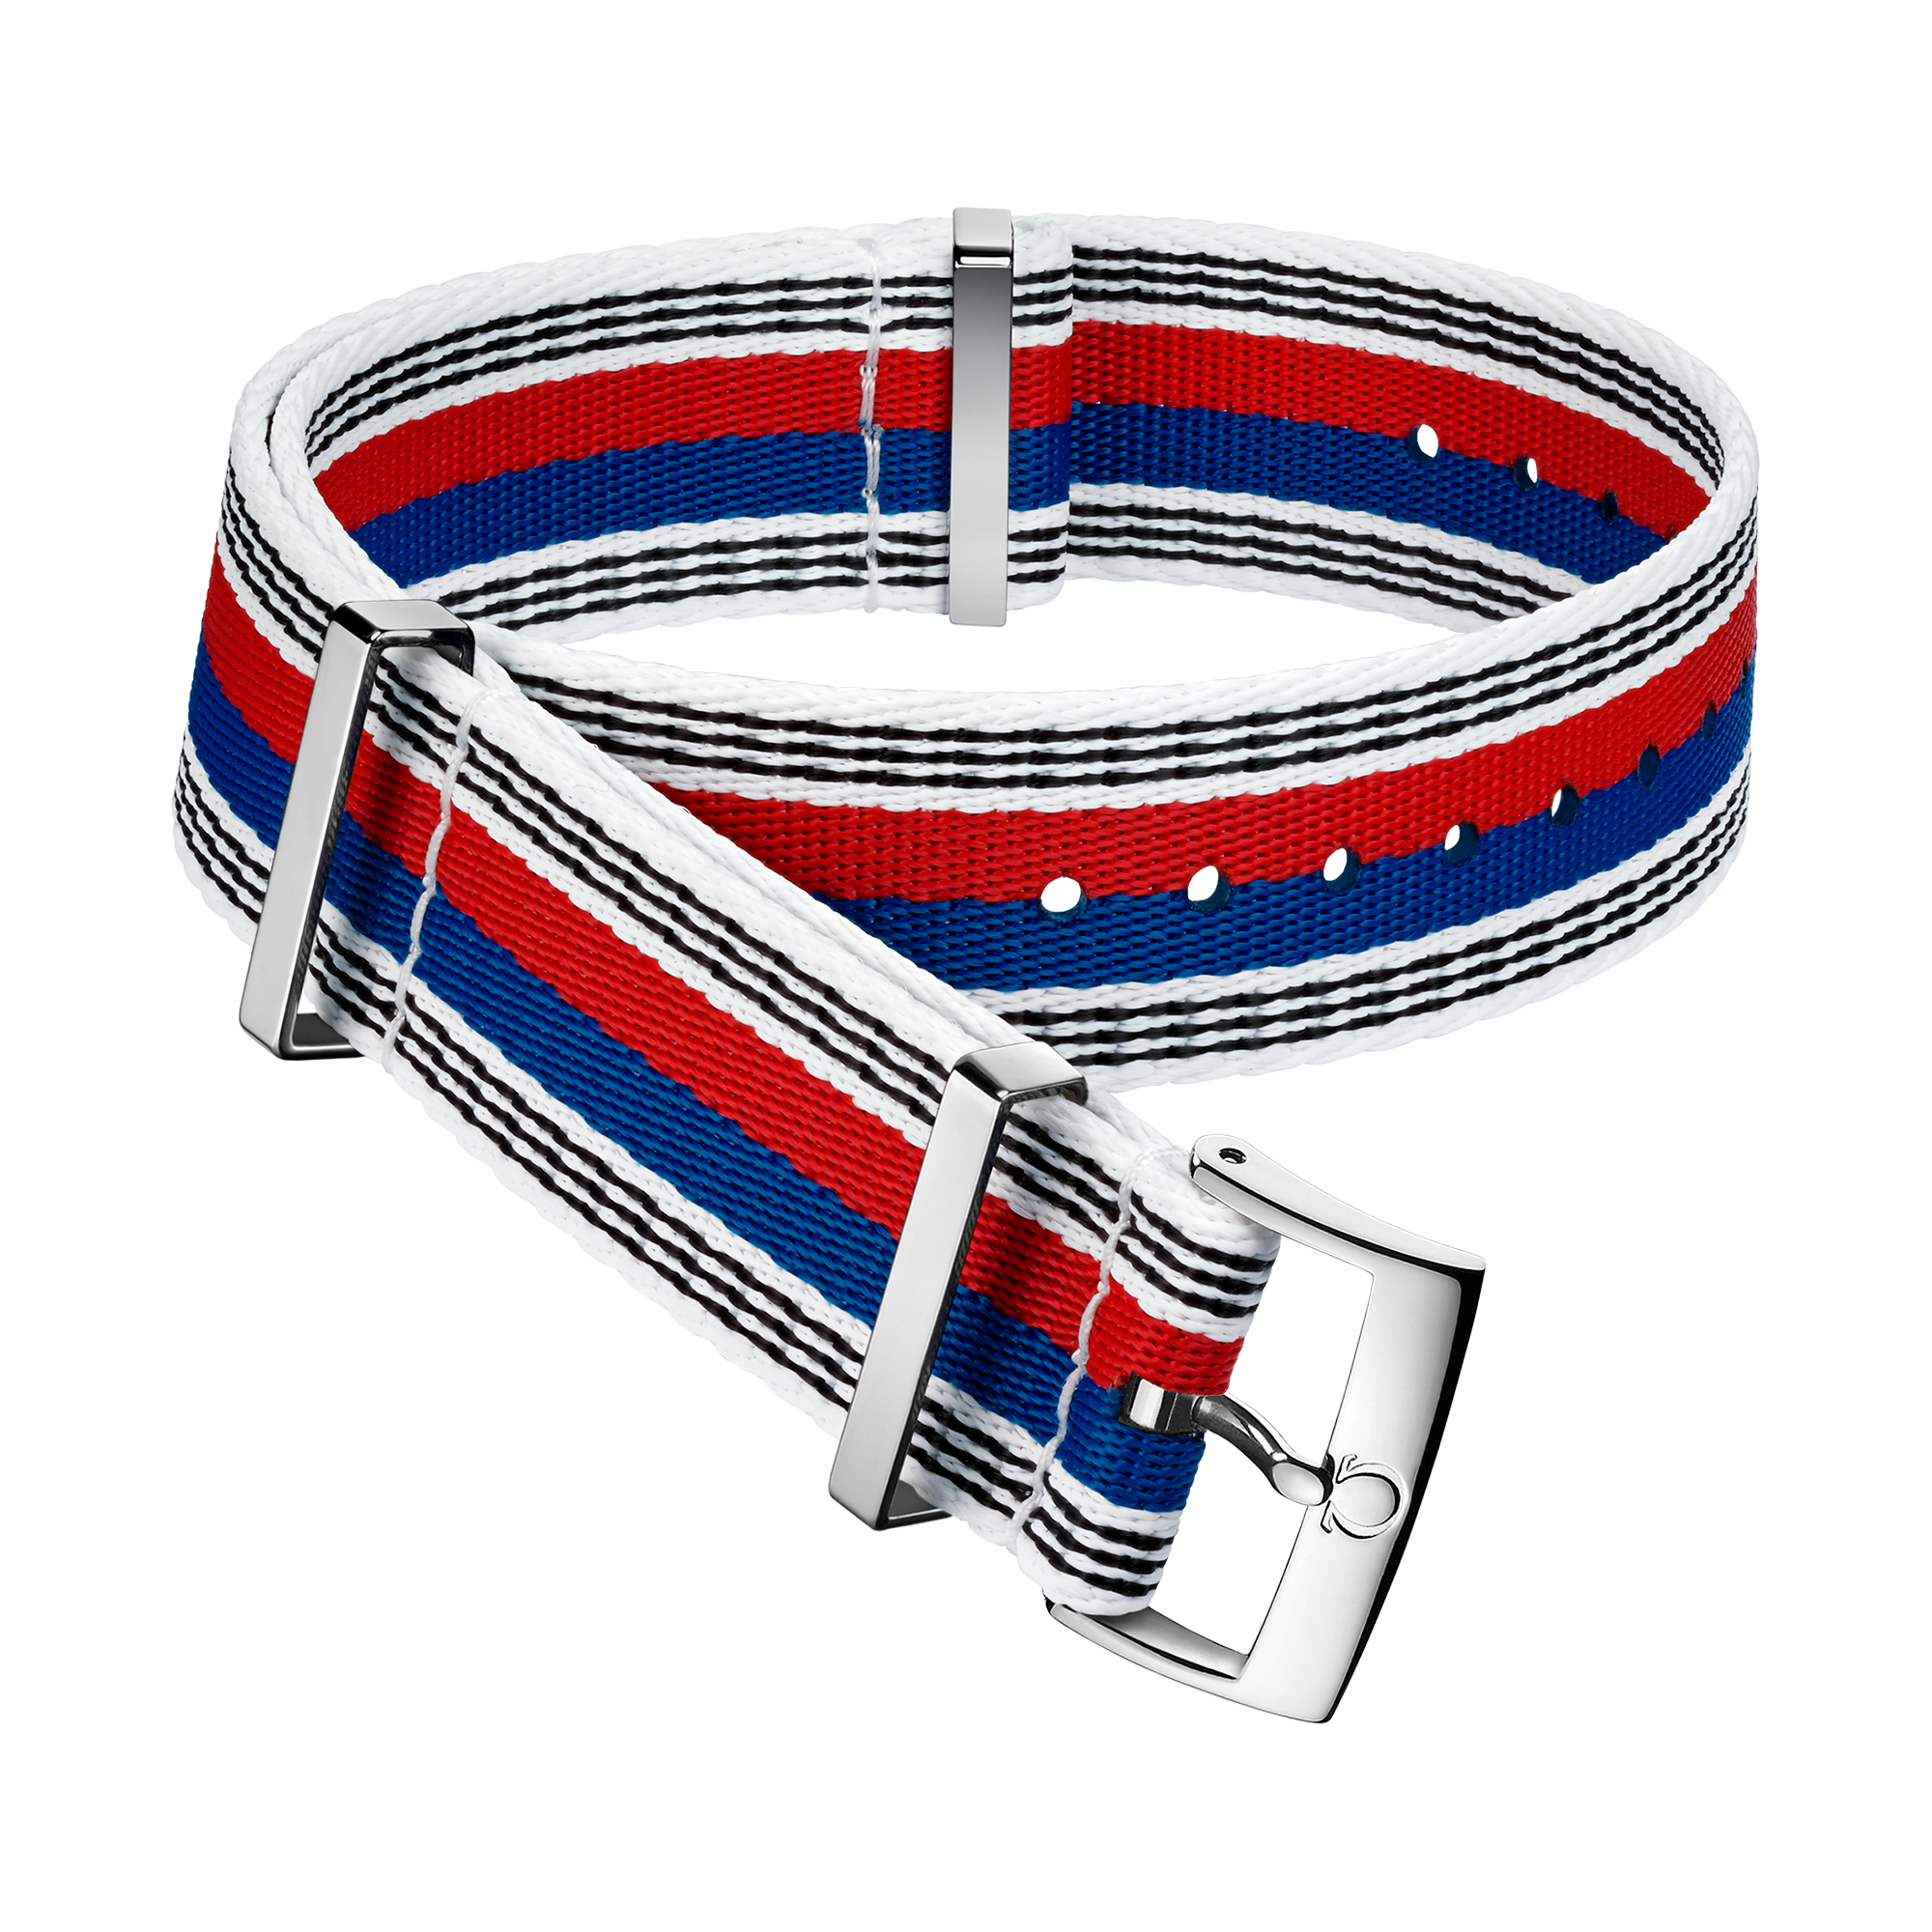 NATO strap - Polyamide white strap with red, blue and black stripes - 031CWZ010636